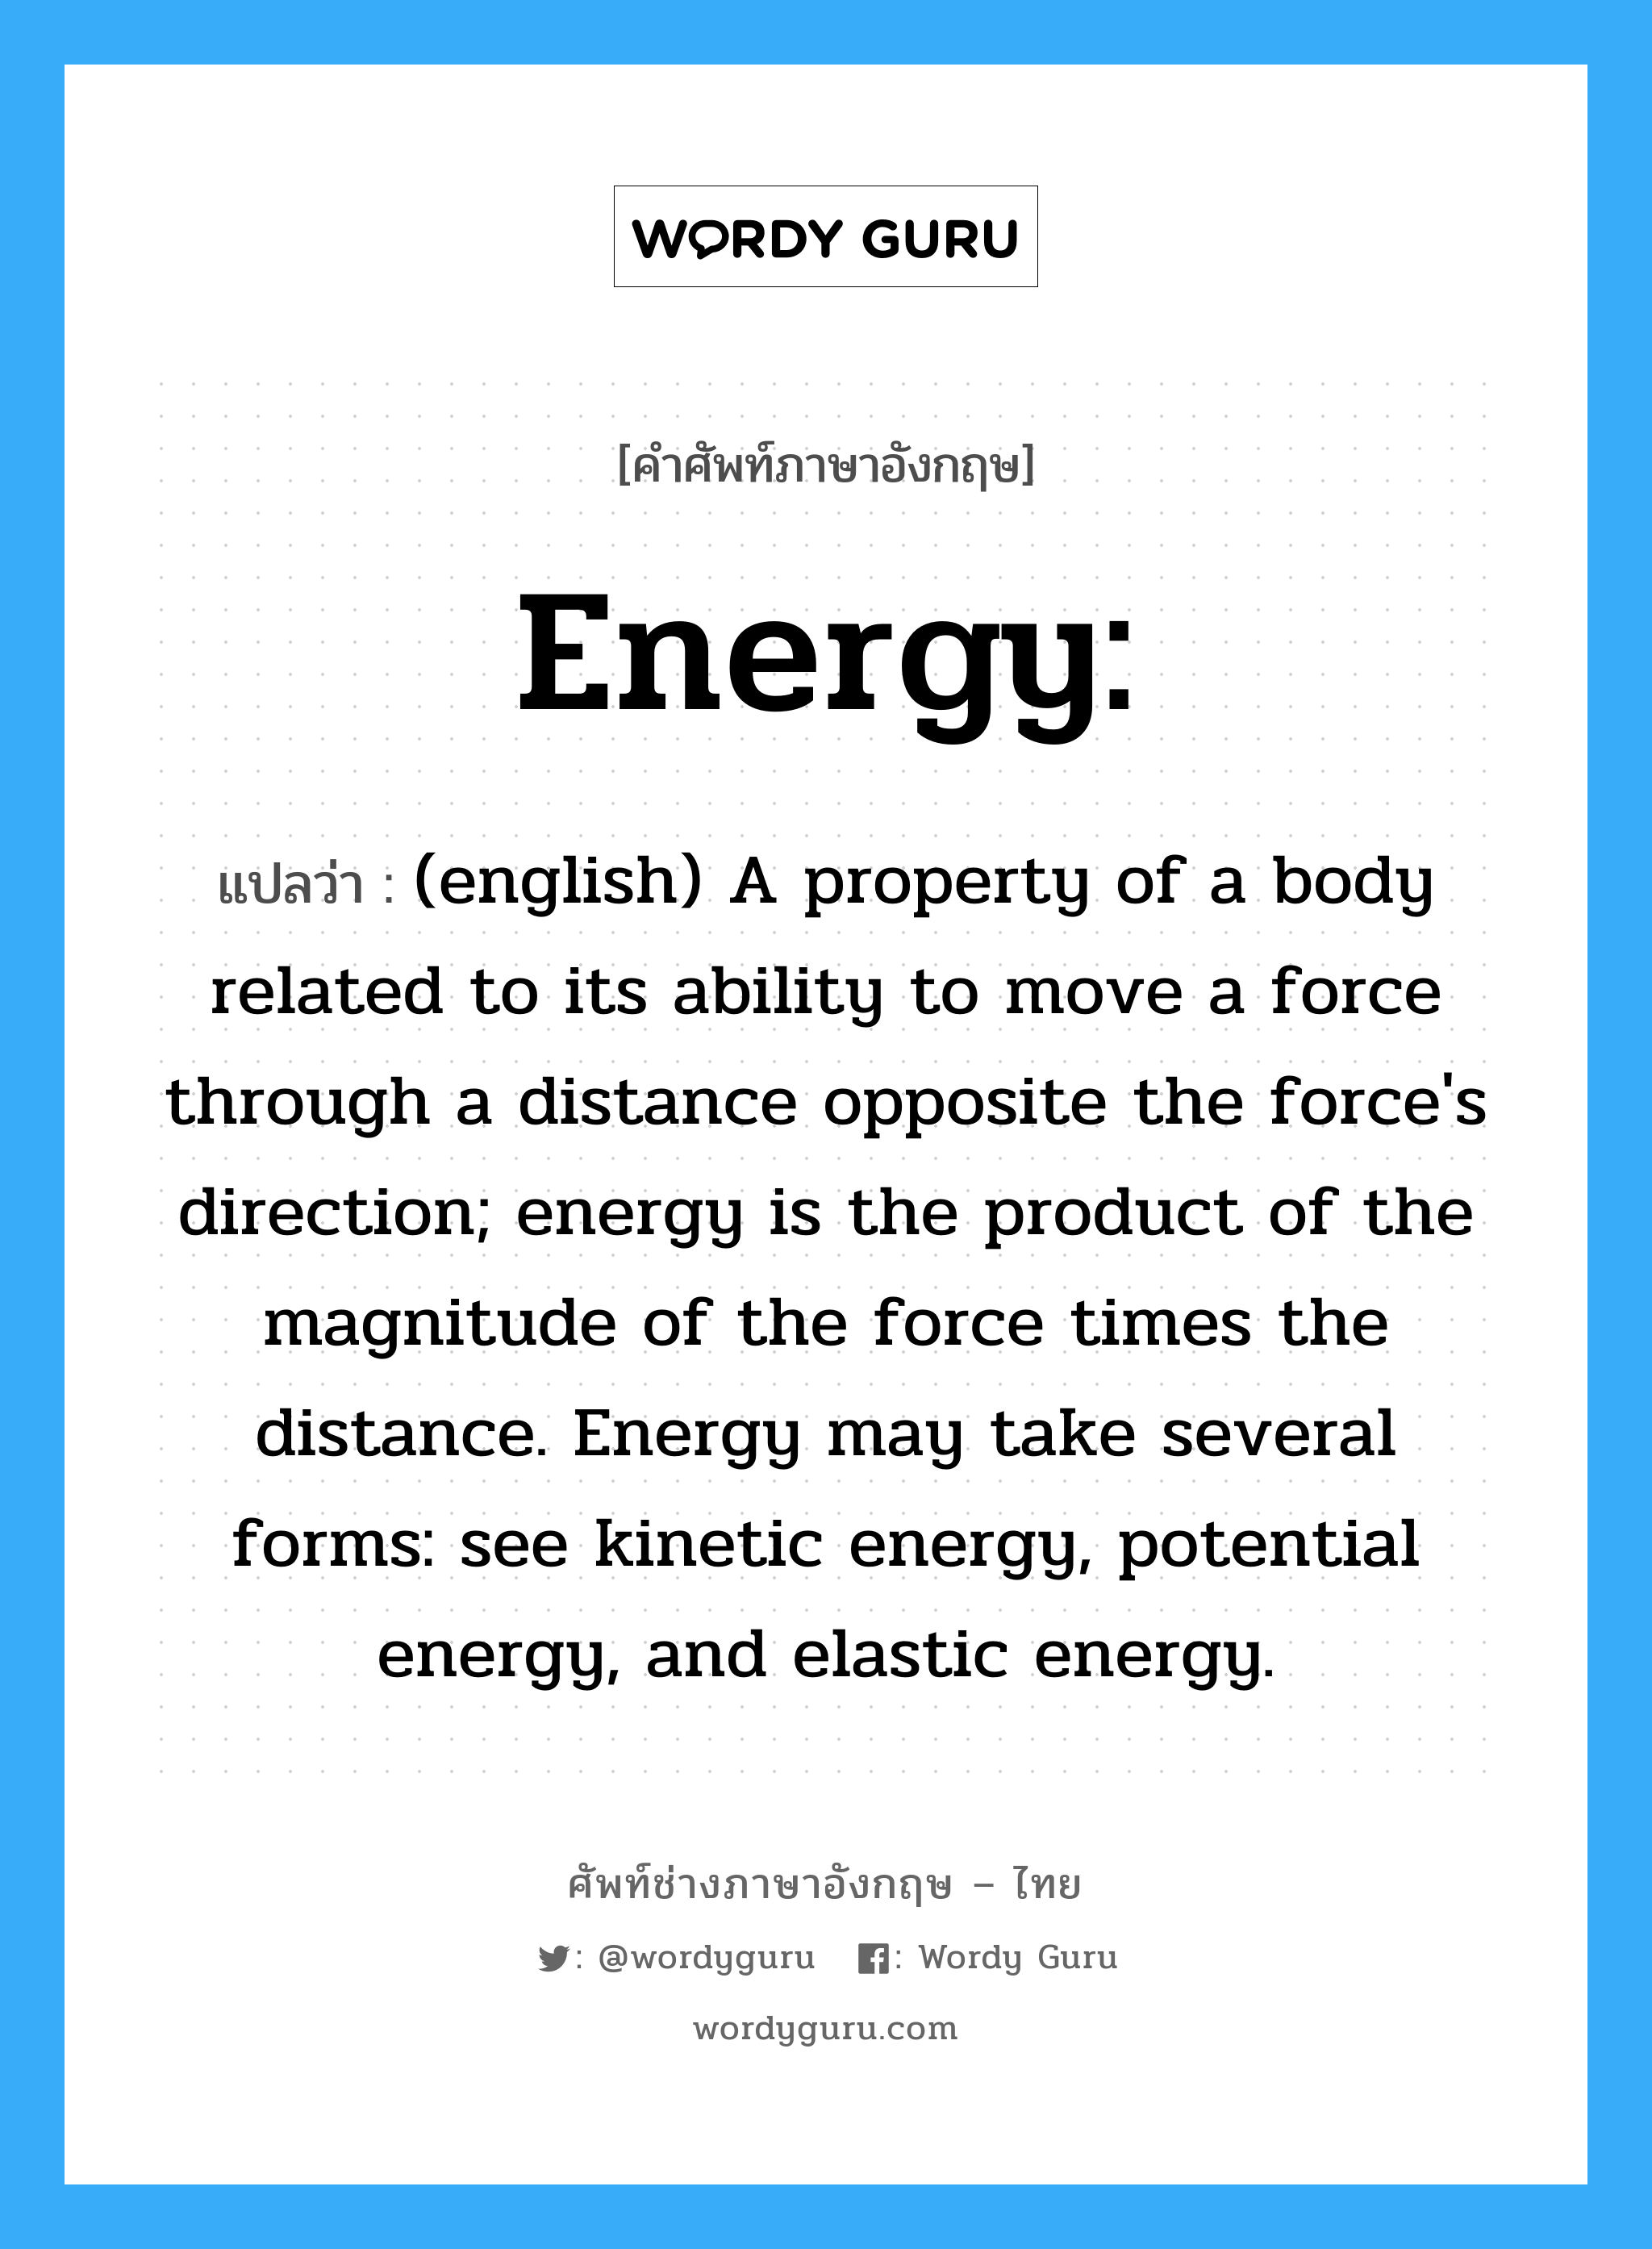 (english) A property of a body related to its ability to move a force through a distance opposite the force's direction; energy is the product of the magnitude of the force times the distance. Energy may take several forms: see kinetic energy, potential energy, and elastic energy. ภาษาอังกฤษ?, คำศัพท์ช่างภาษาอังกฤษ - ไทย (english) A property of a body related to its ability to move a force through a distance opposite the force's direction; energy is the product of the magnitude of the force times the distance. Energy may take several forms: see kinetic energy, potential energy, and elastic energy. คำศัพท์ภาษาอังกฤษ (english) A property of a body related to its ability to move a force through a distance opposite the force's direction; energy is the product of the magnitude of the force times the distance. Energy may take several forms: see kinetic energy, potential energy, and elastic energy. แปลว่า Energy: